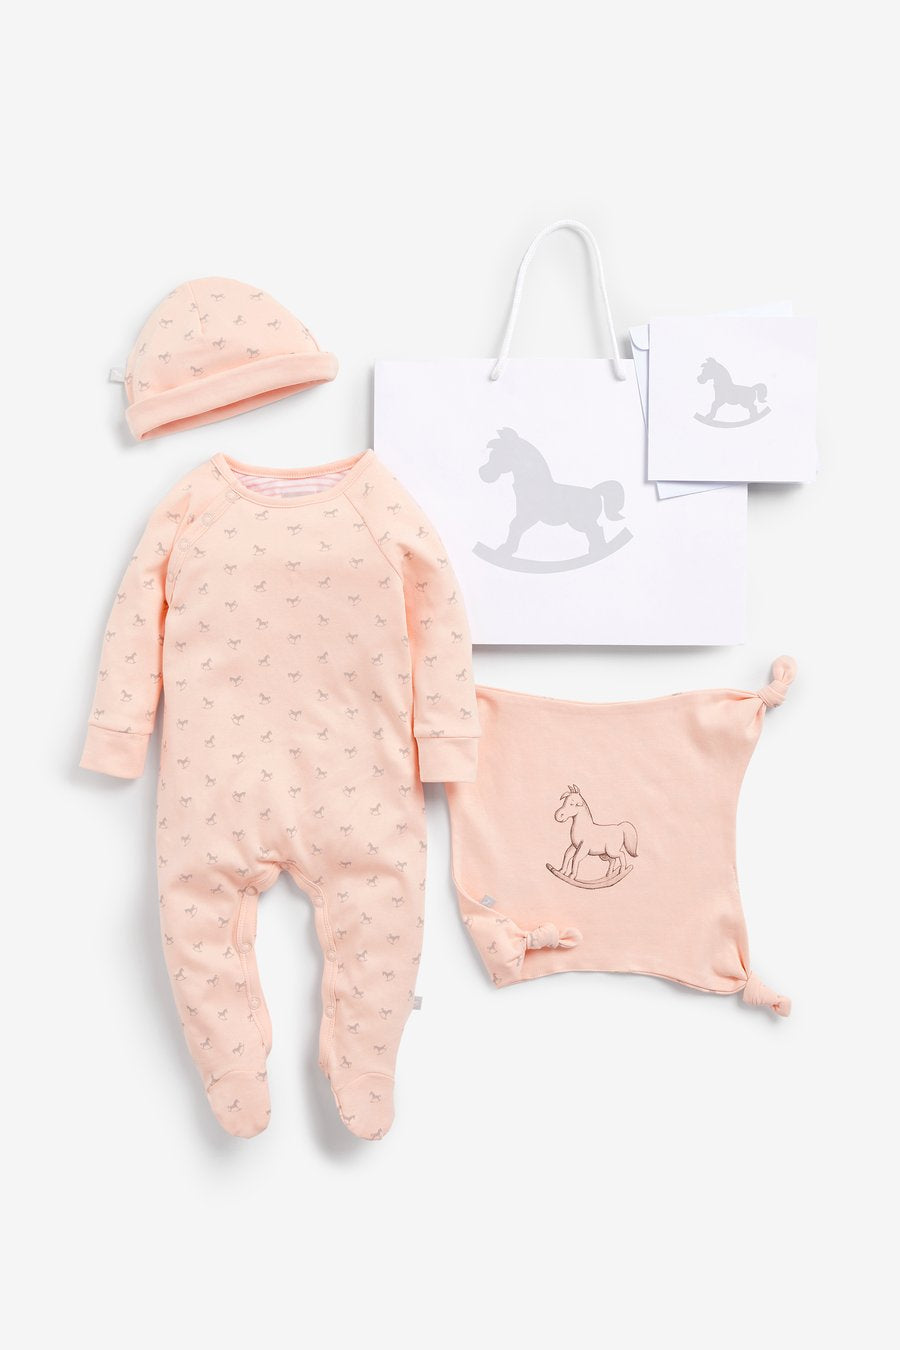 The Little Tailor Super Soft Jersey Sleepsuit, Hat and Comforter Gift Set - Pink